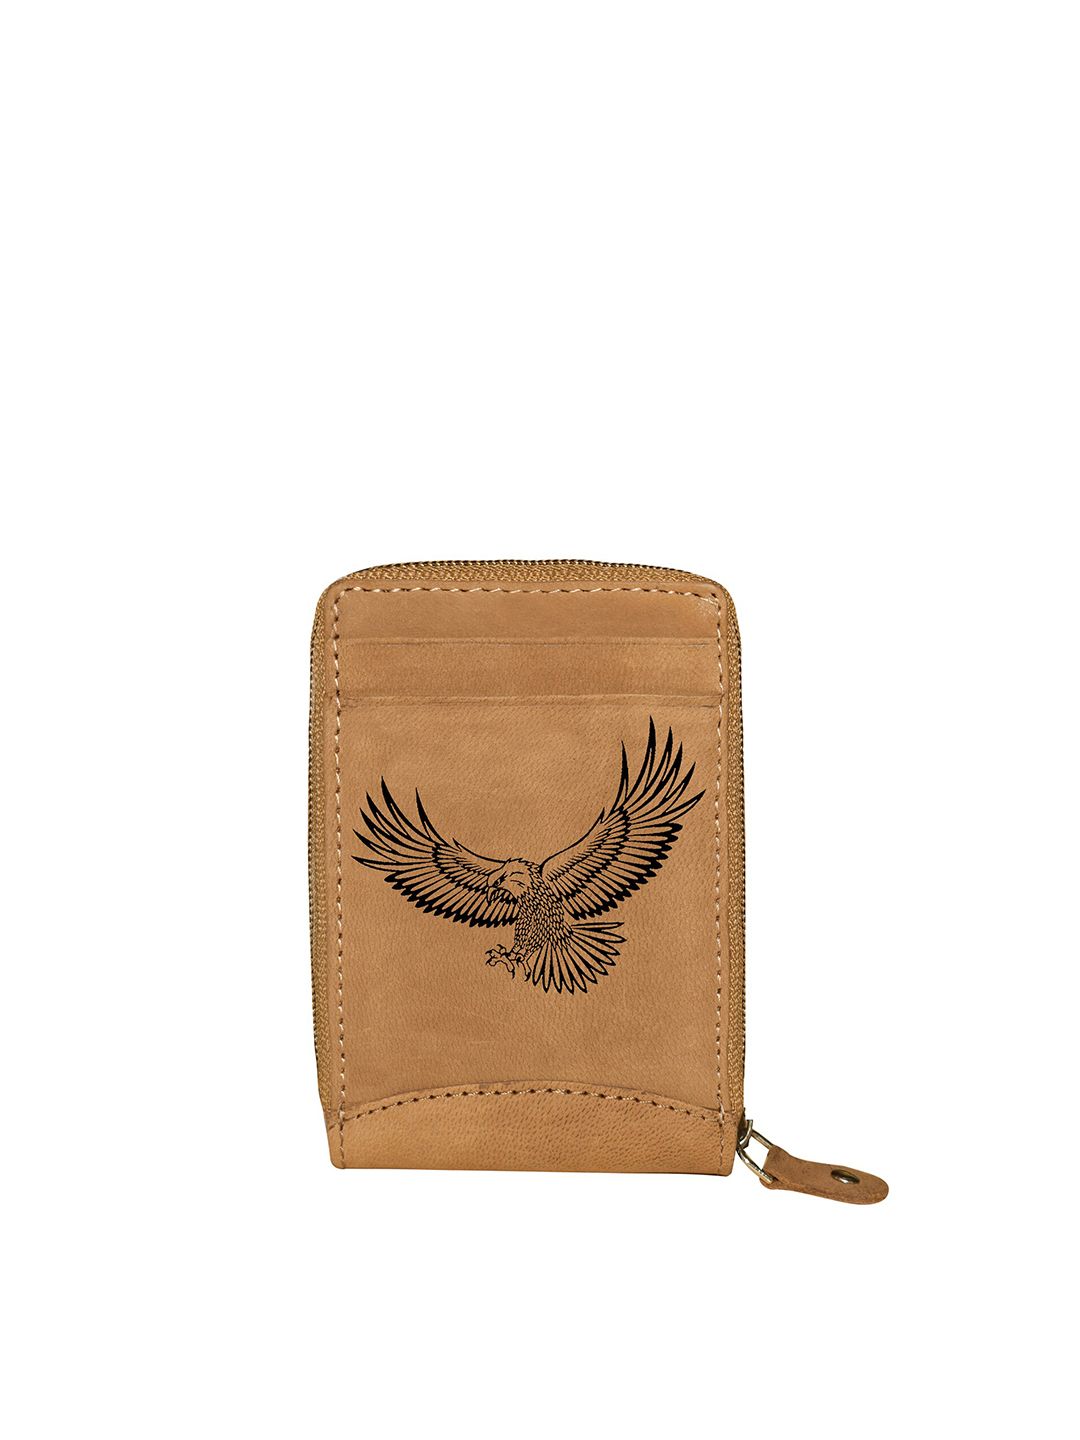 ABYS Unisex Tan Brown Leather Card Holder Price in India